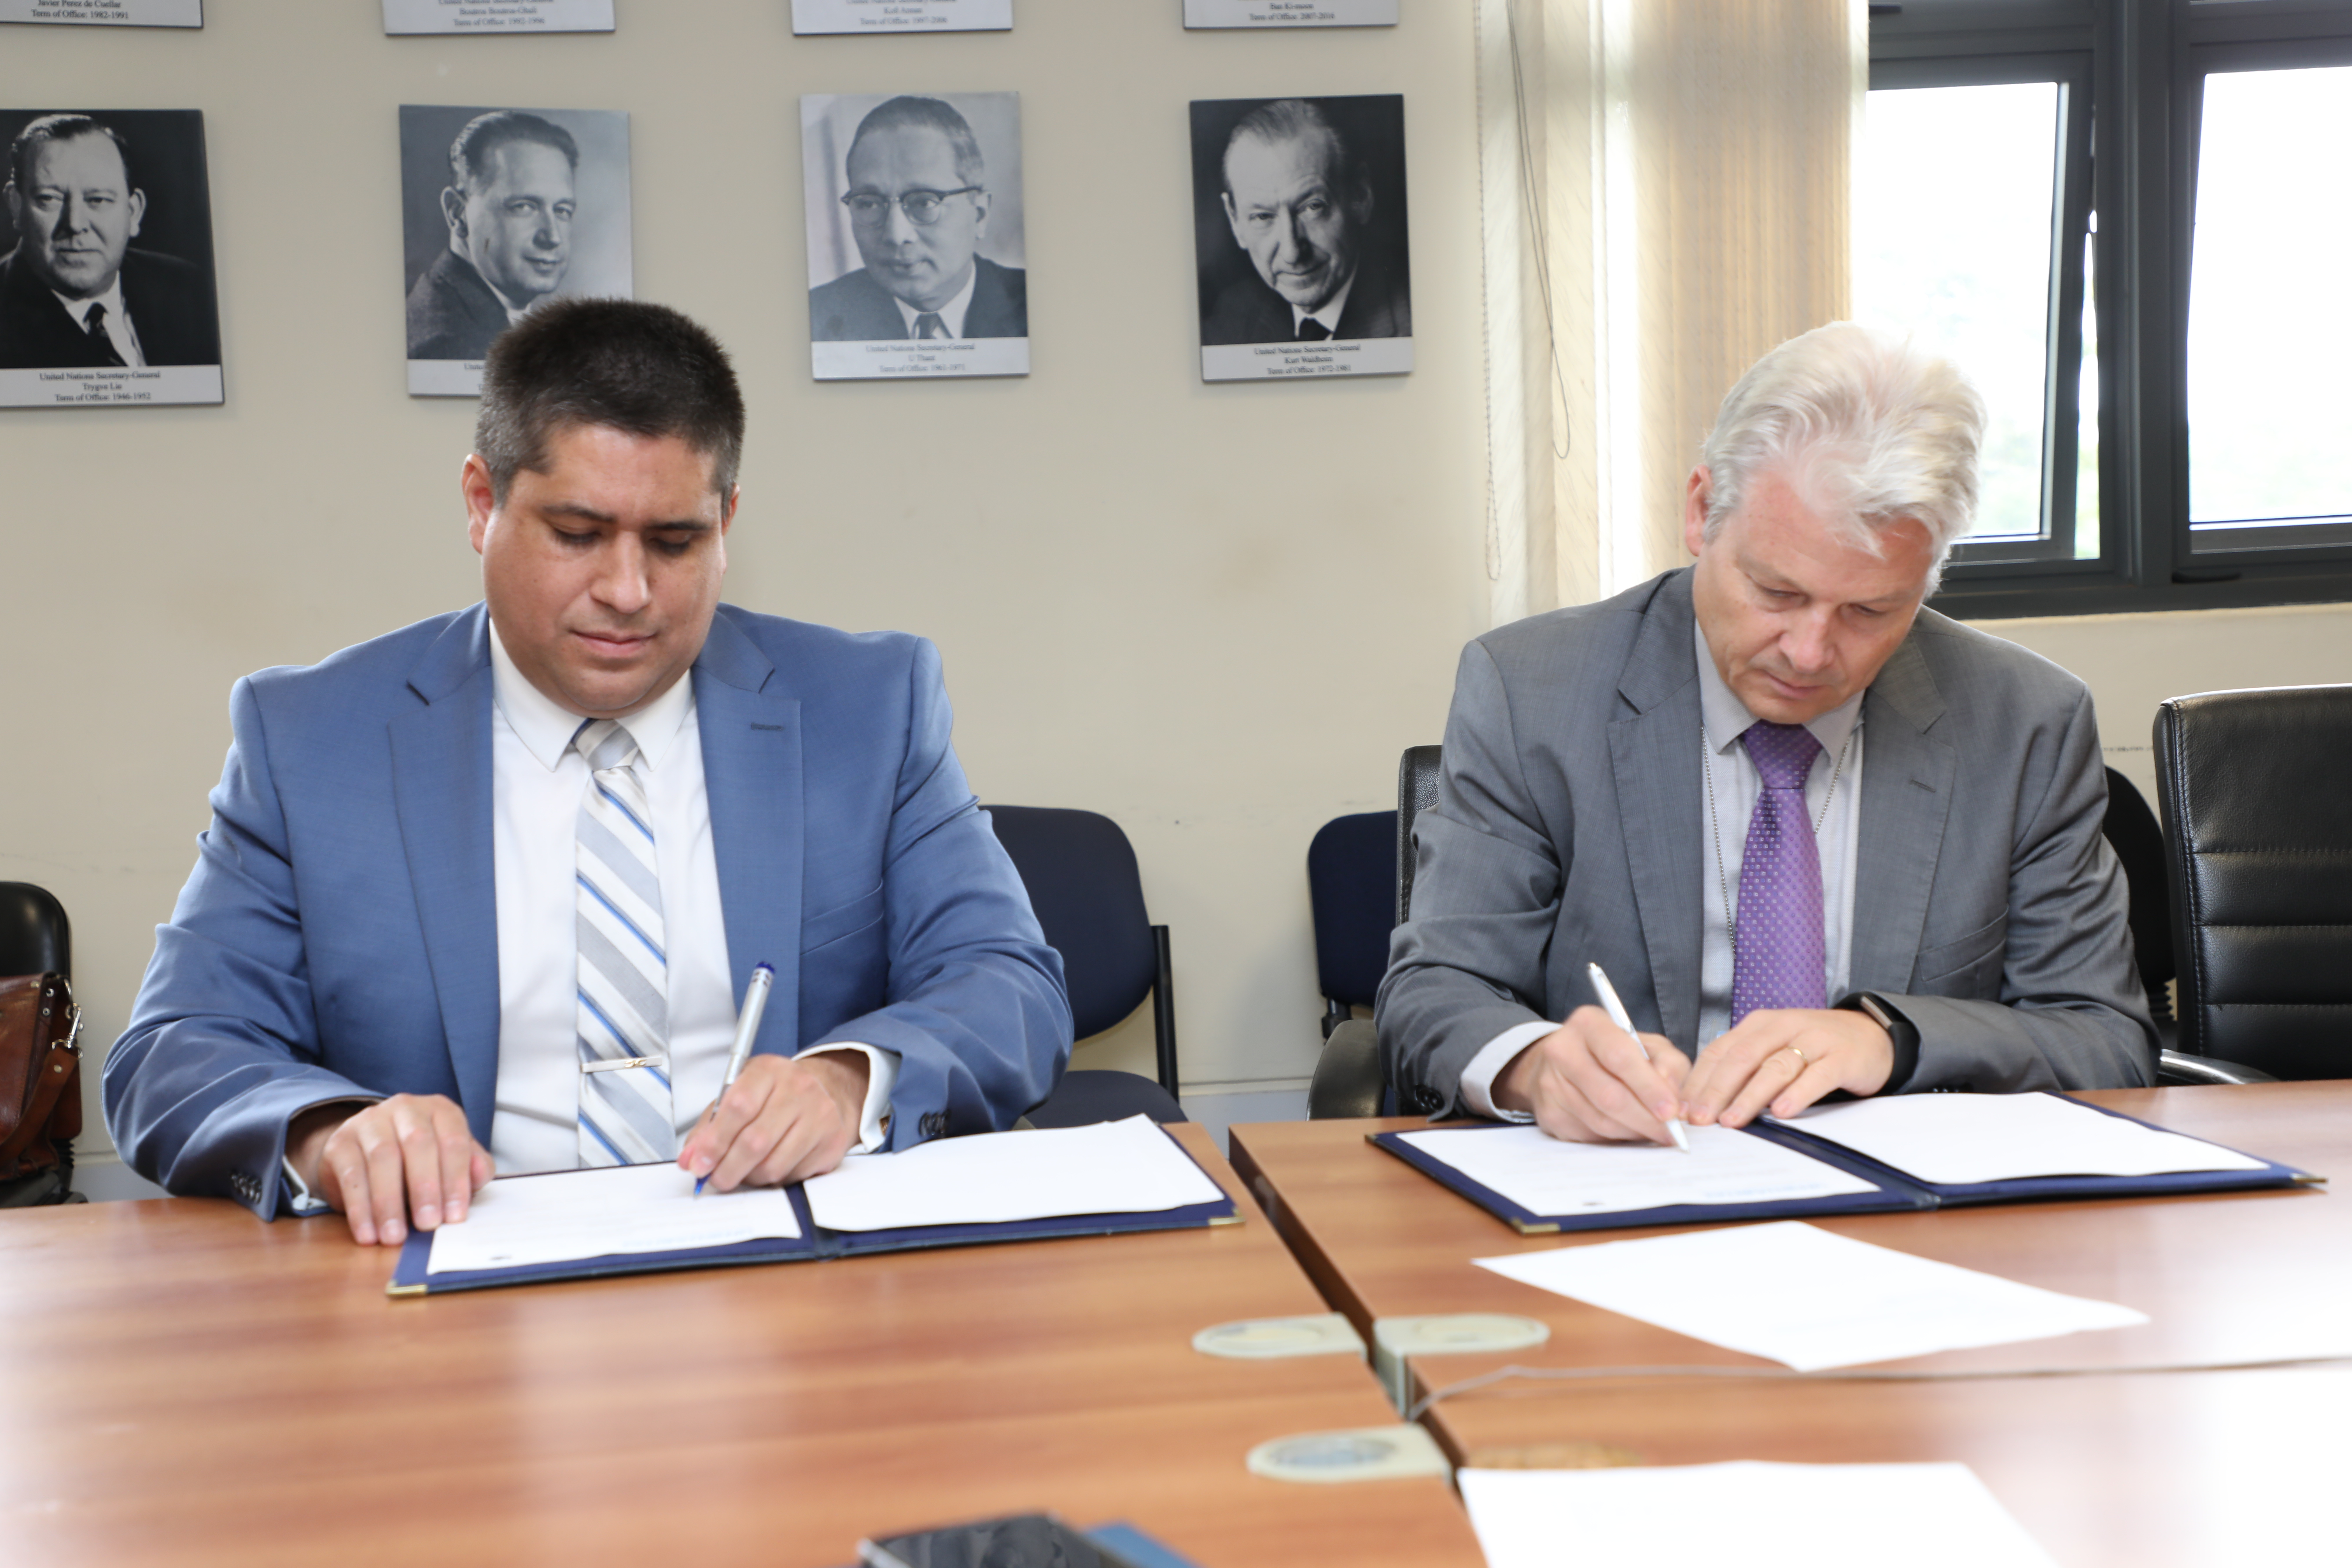 UN-Habitat and the World Blind Union sign a milestone agreement to work together to make cities accessible for all